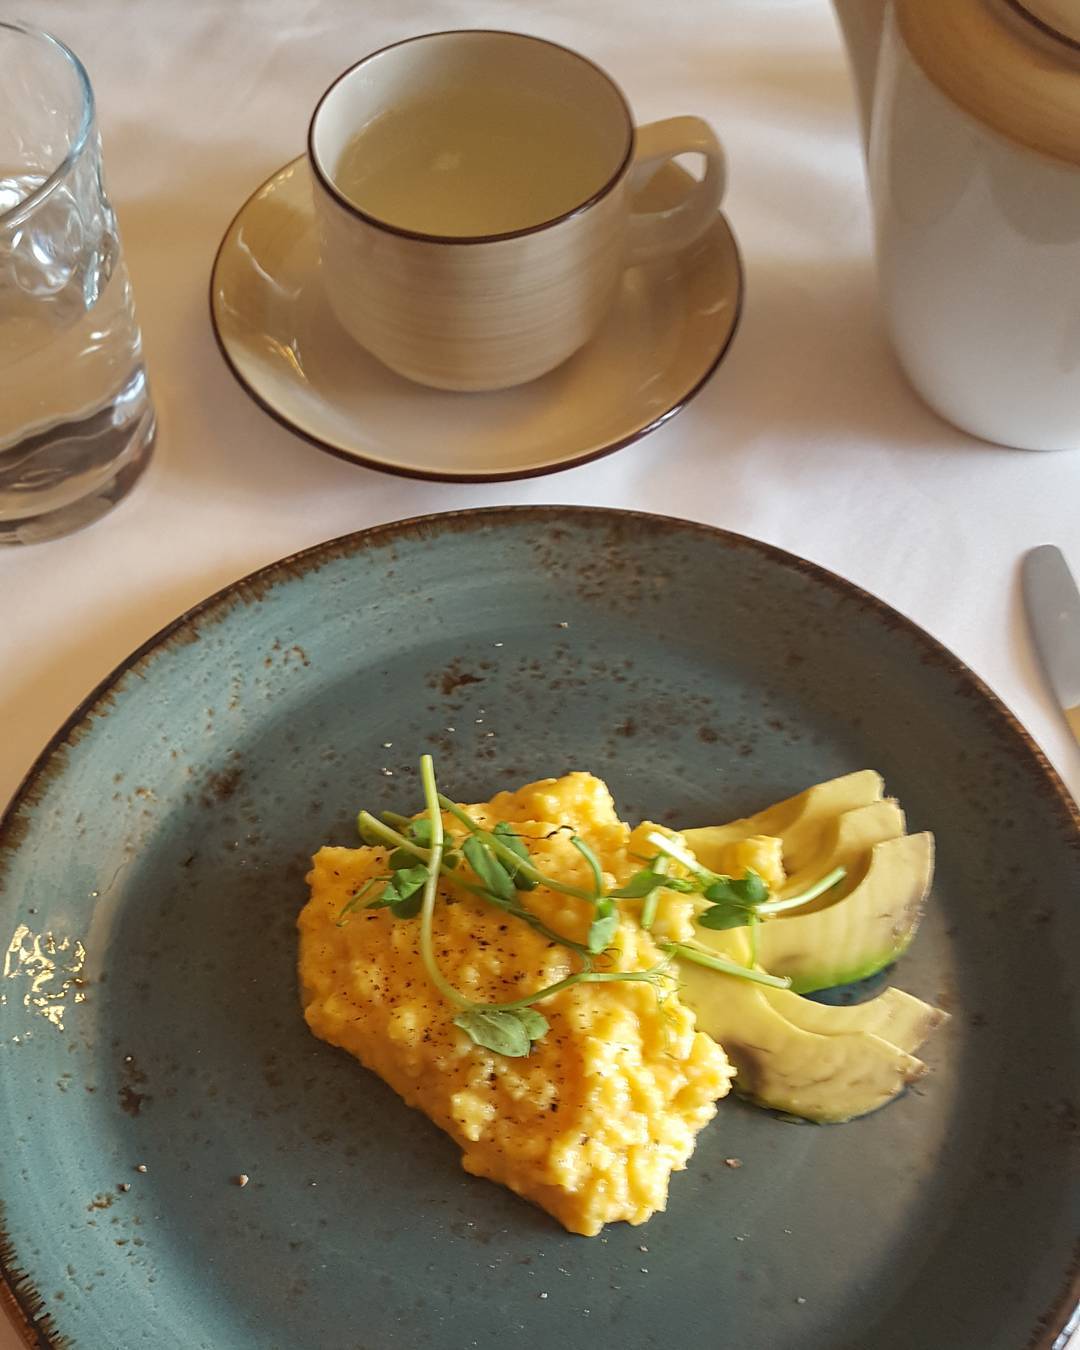 Sunday breakfast.

Scrambled eggs and avocado with some shoots and lemon and ginger hot water.
Protein in the eggs and complex carbs and good fats in the avocado. 
@grayshottspa